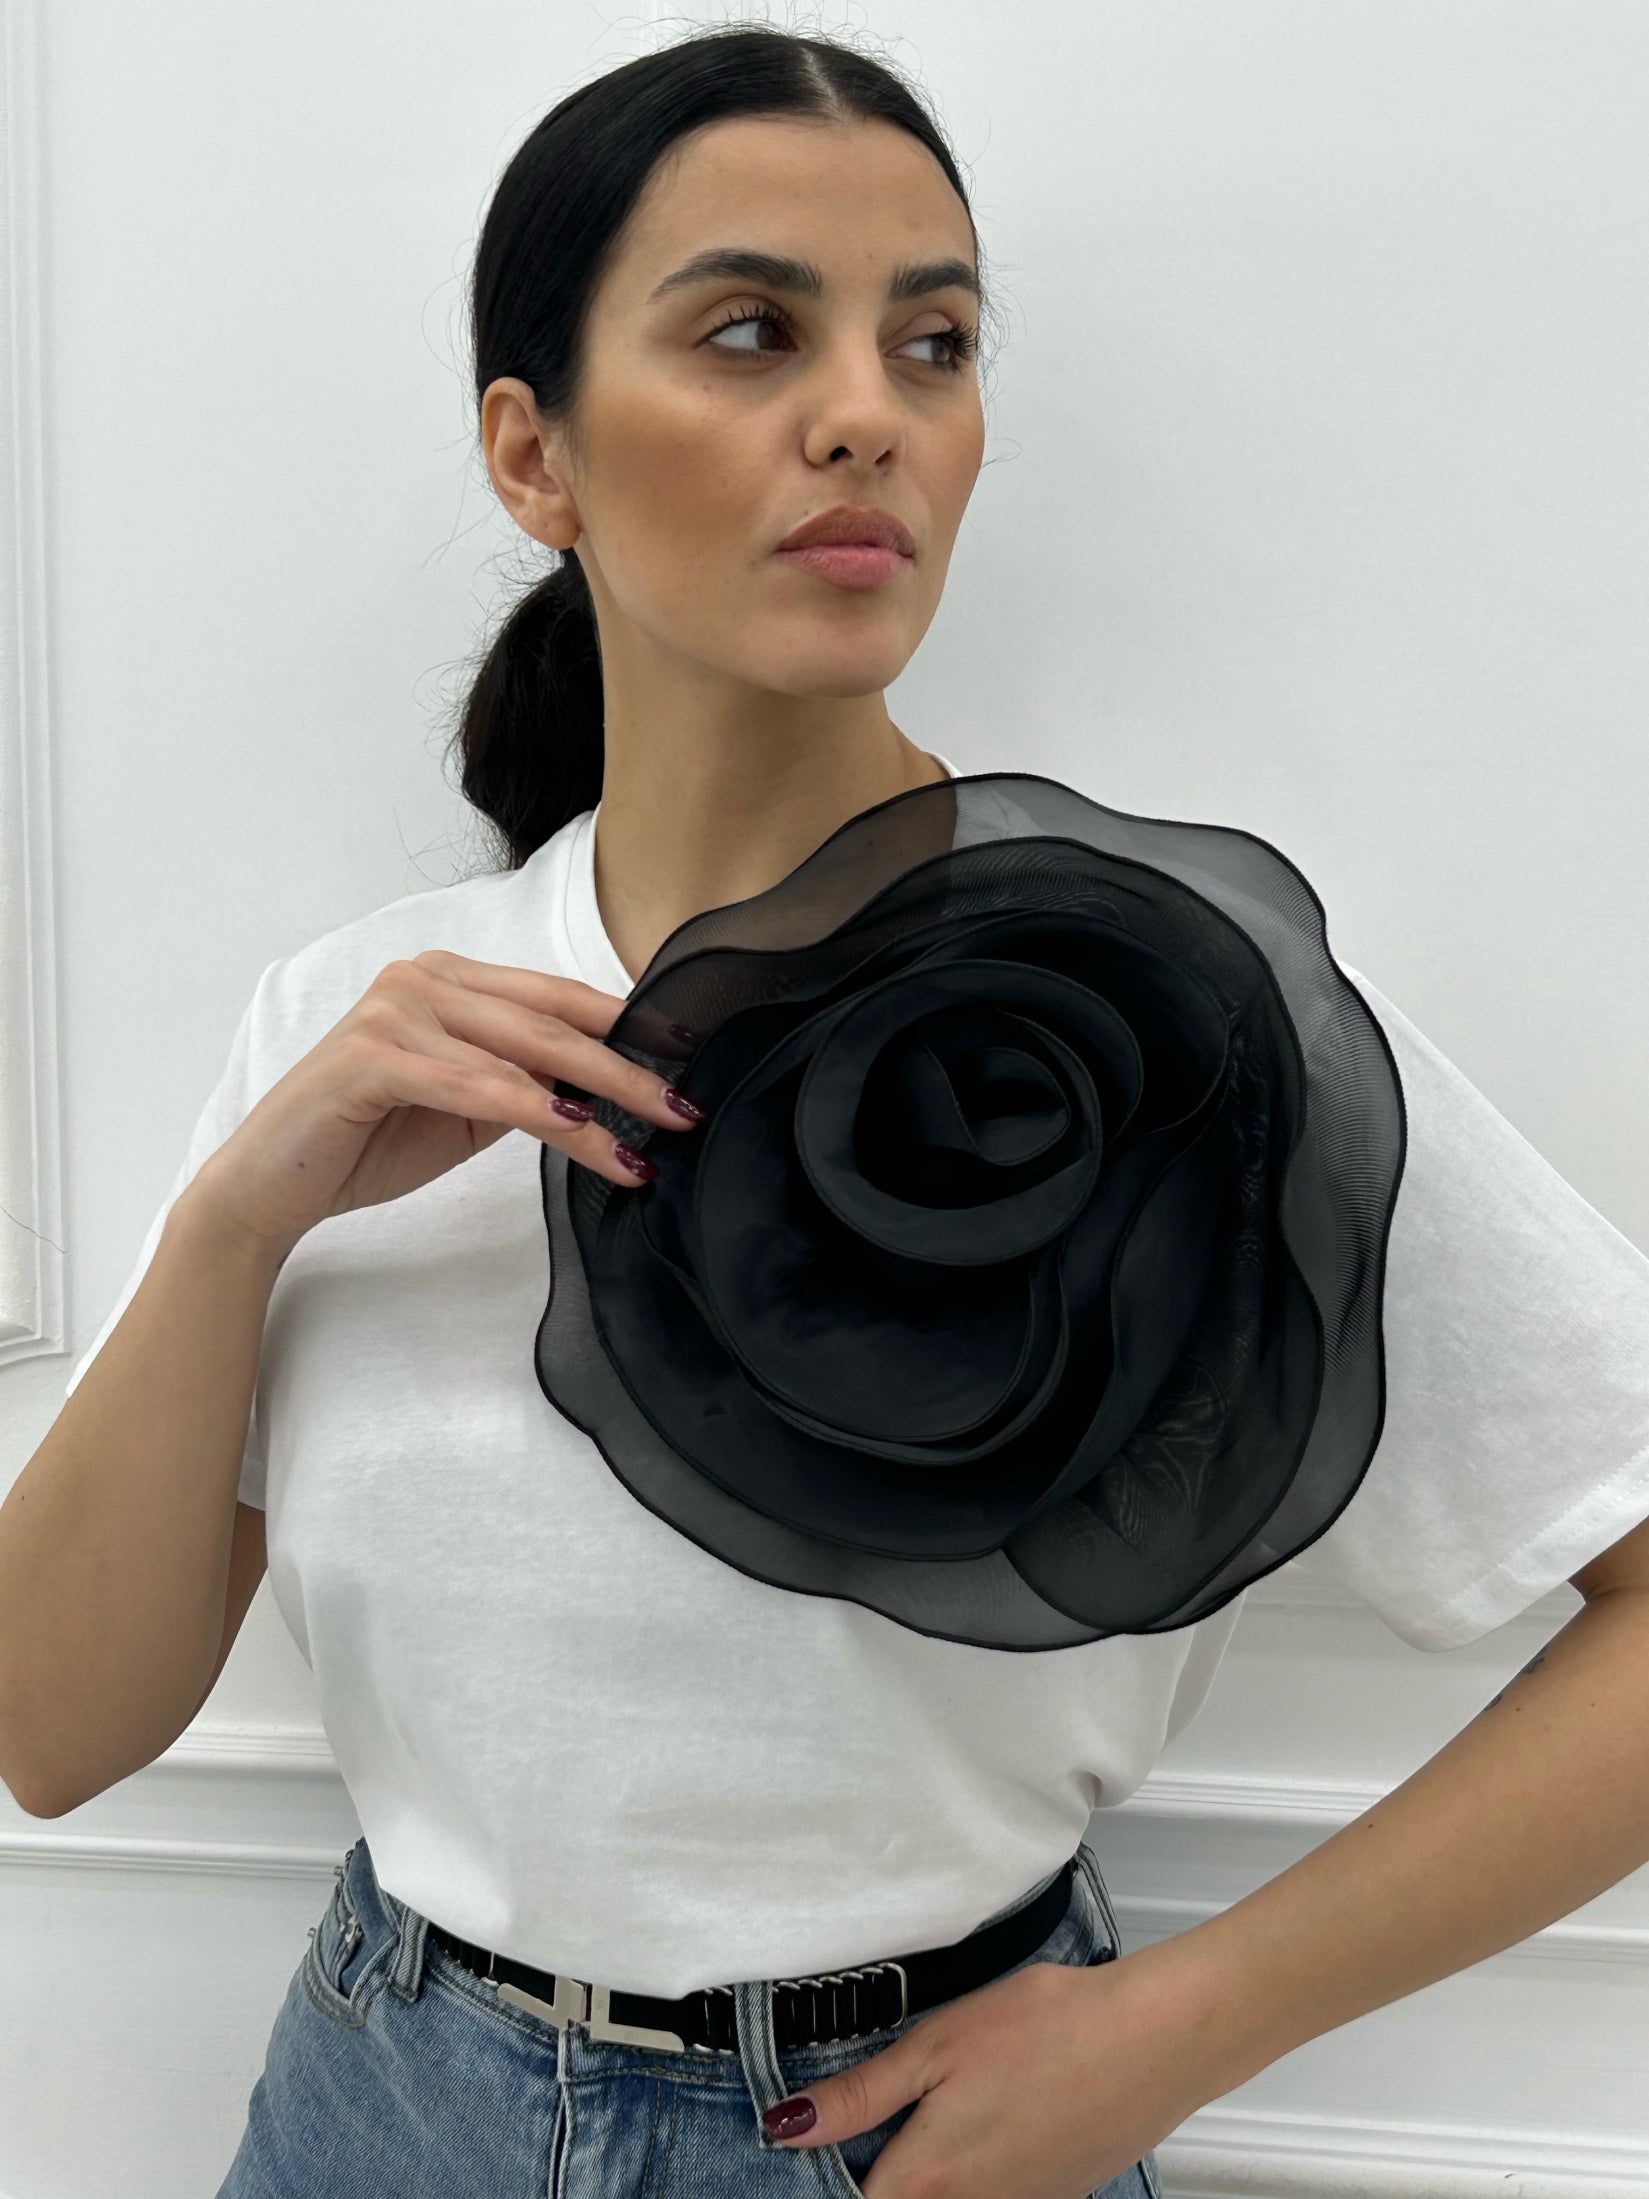 T-SHIRT CON ROSA IN TULLE NEW COLLECTION